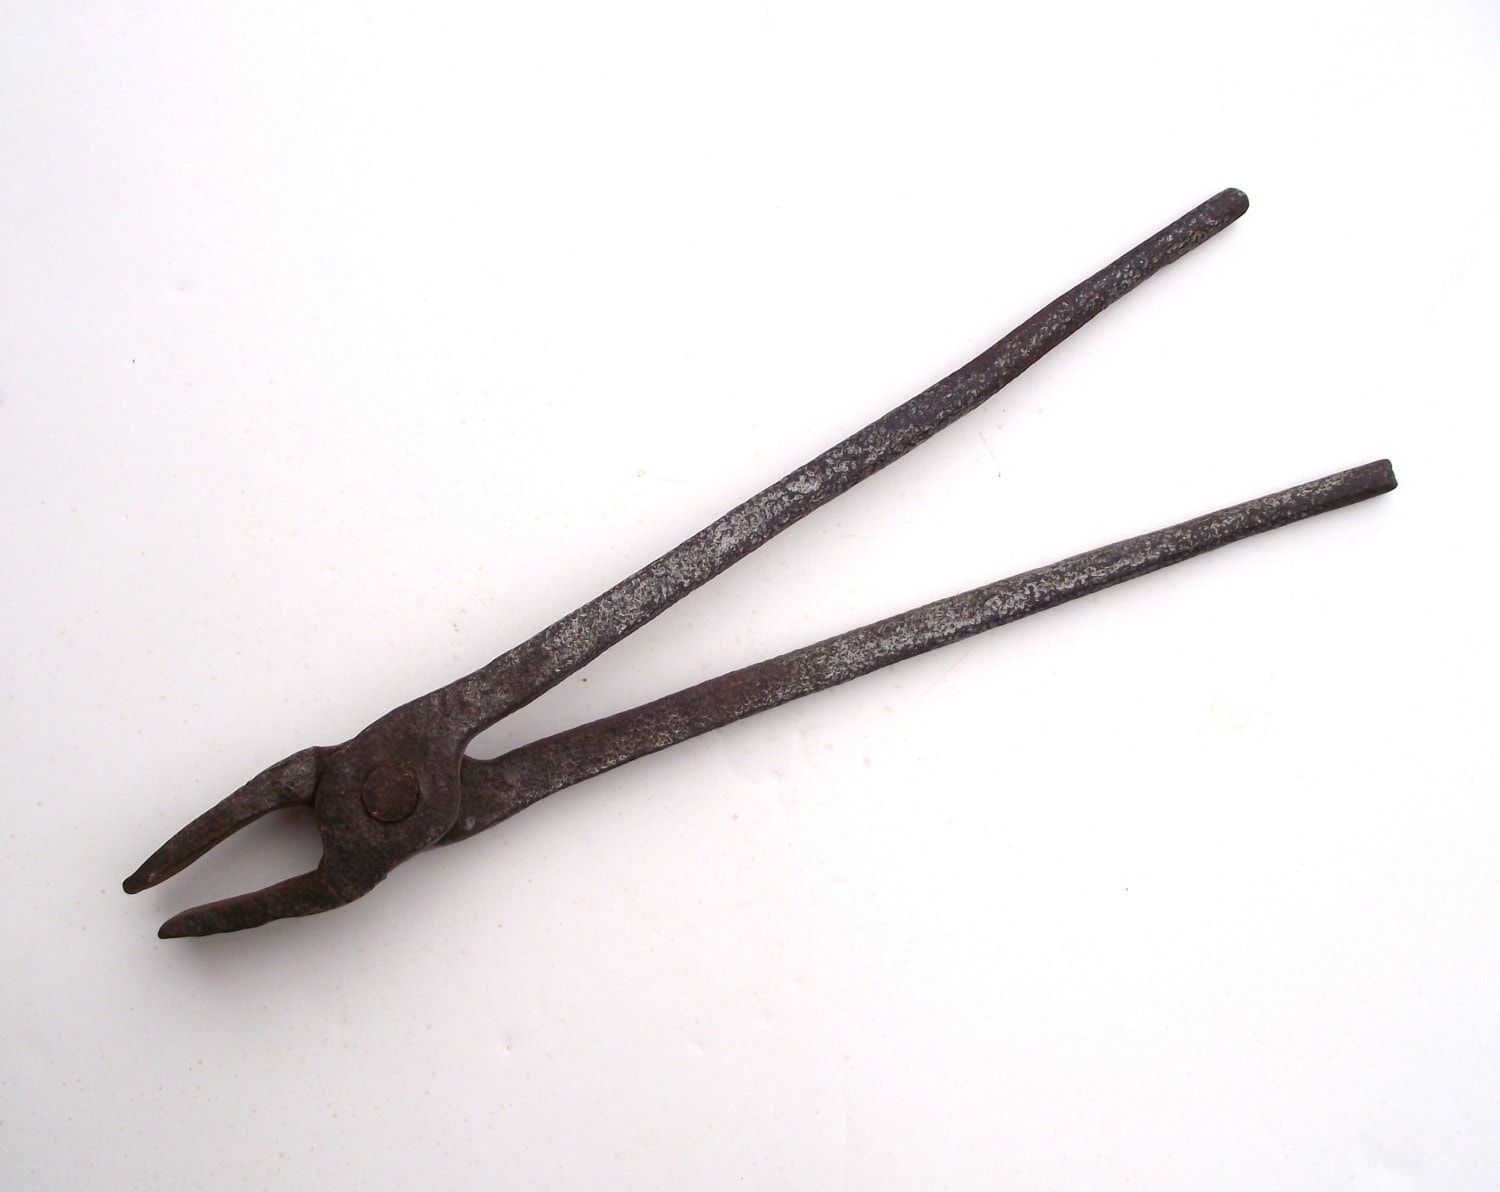 Antique Blacksmith Tongs Hand Forged Iron Tongs Primitive